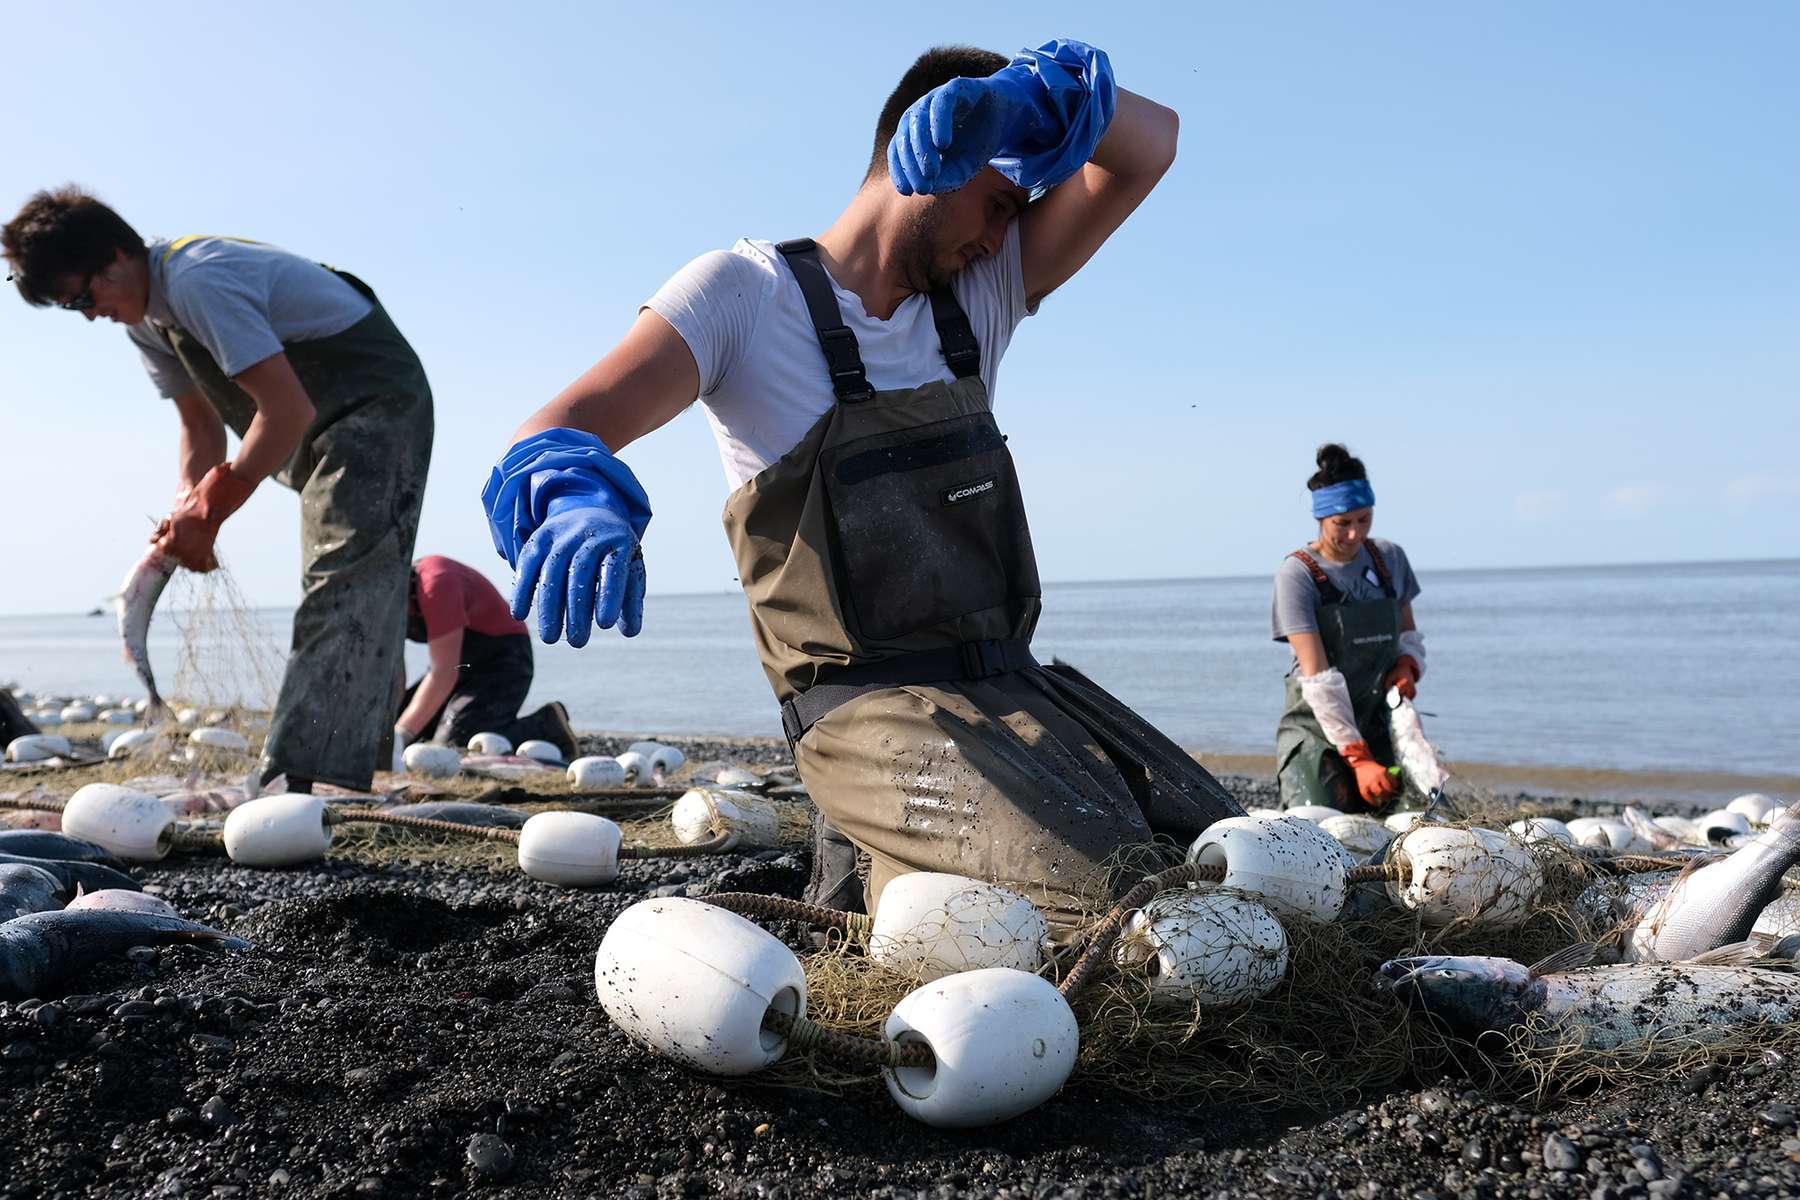 Nicholas Bouker wipes his brow as he picks salmon out of the net in Ekuk, Alaska on July 4, 2019. Temperatures reached into 90's in Anchorage - 25 degrees above average - a record high. Rising water temperatures throughout the summer caused an estimated 100,000 fish to die. (Photo by Karen Ducey)